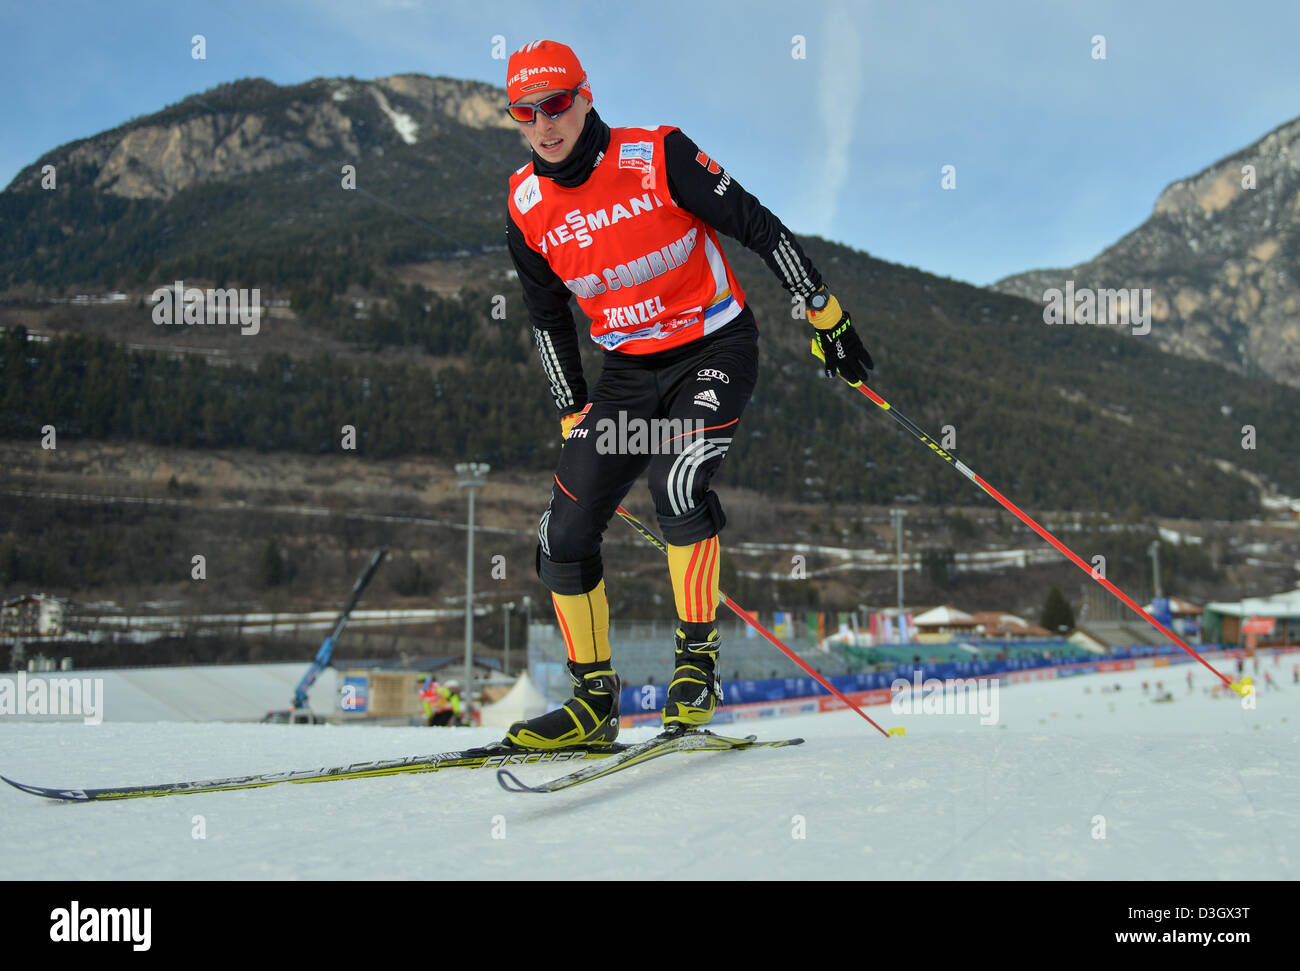 Val di Fiemme, Italy. 19th February 2013. Eric Frenzel of Germany in action during the Nordic Combined training session at the Nordic Skiing World Championships. Photo: Hendrik Schmidt/dpa +++(c) dpa - Bildfunk+++/Alamy Live News Stock Photo